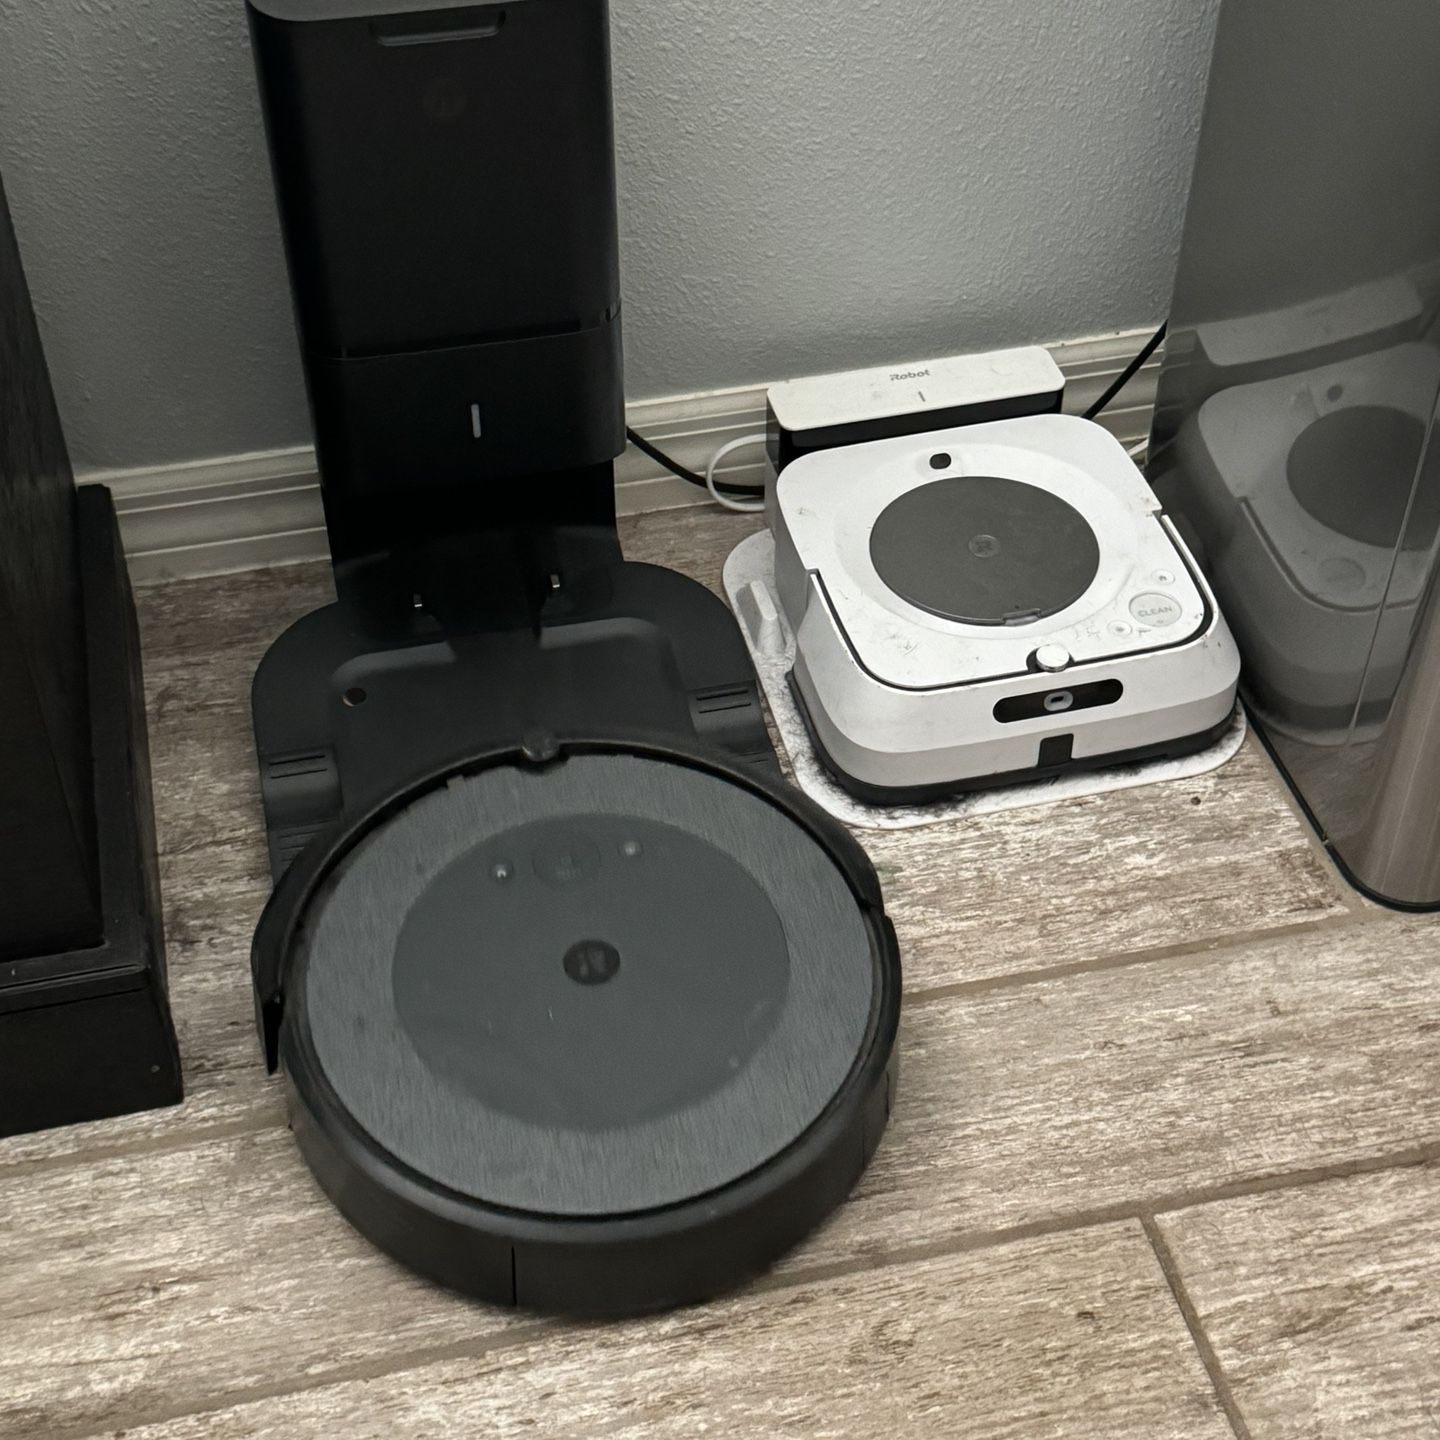 TWO Roomba Robots for Less Than The Price Of One!